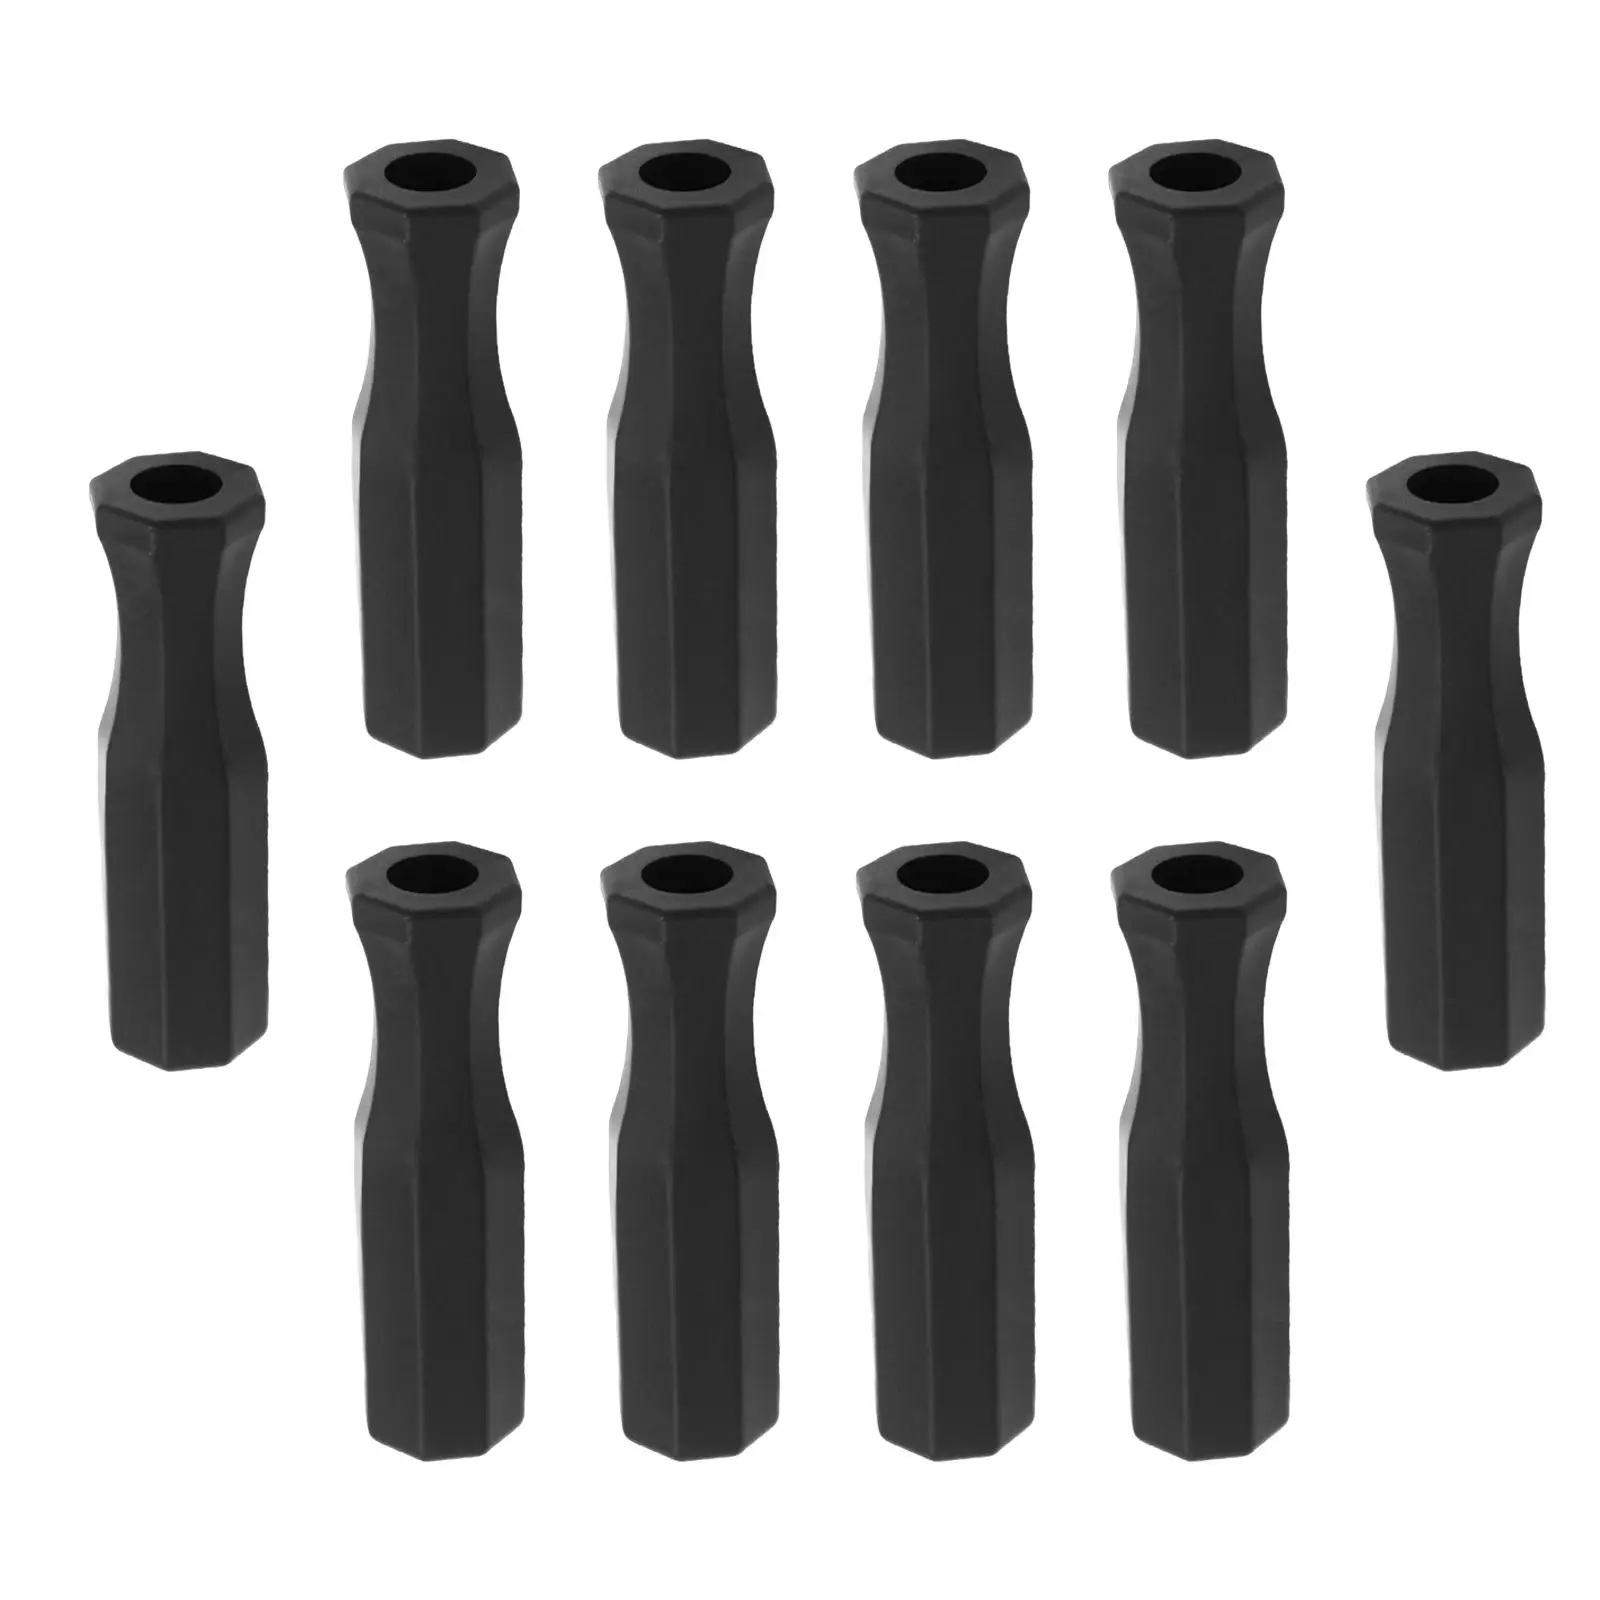 Table Soccer Handle 10Pcs Foosball Soccer Handle Grip Replacement Handle Parts